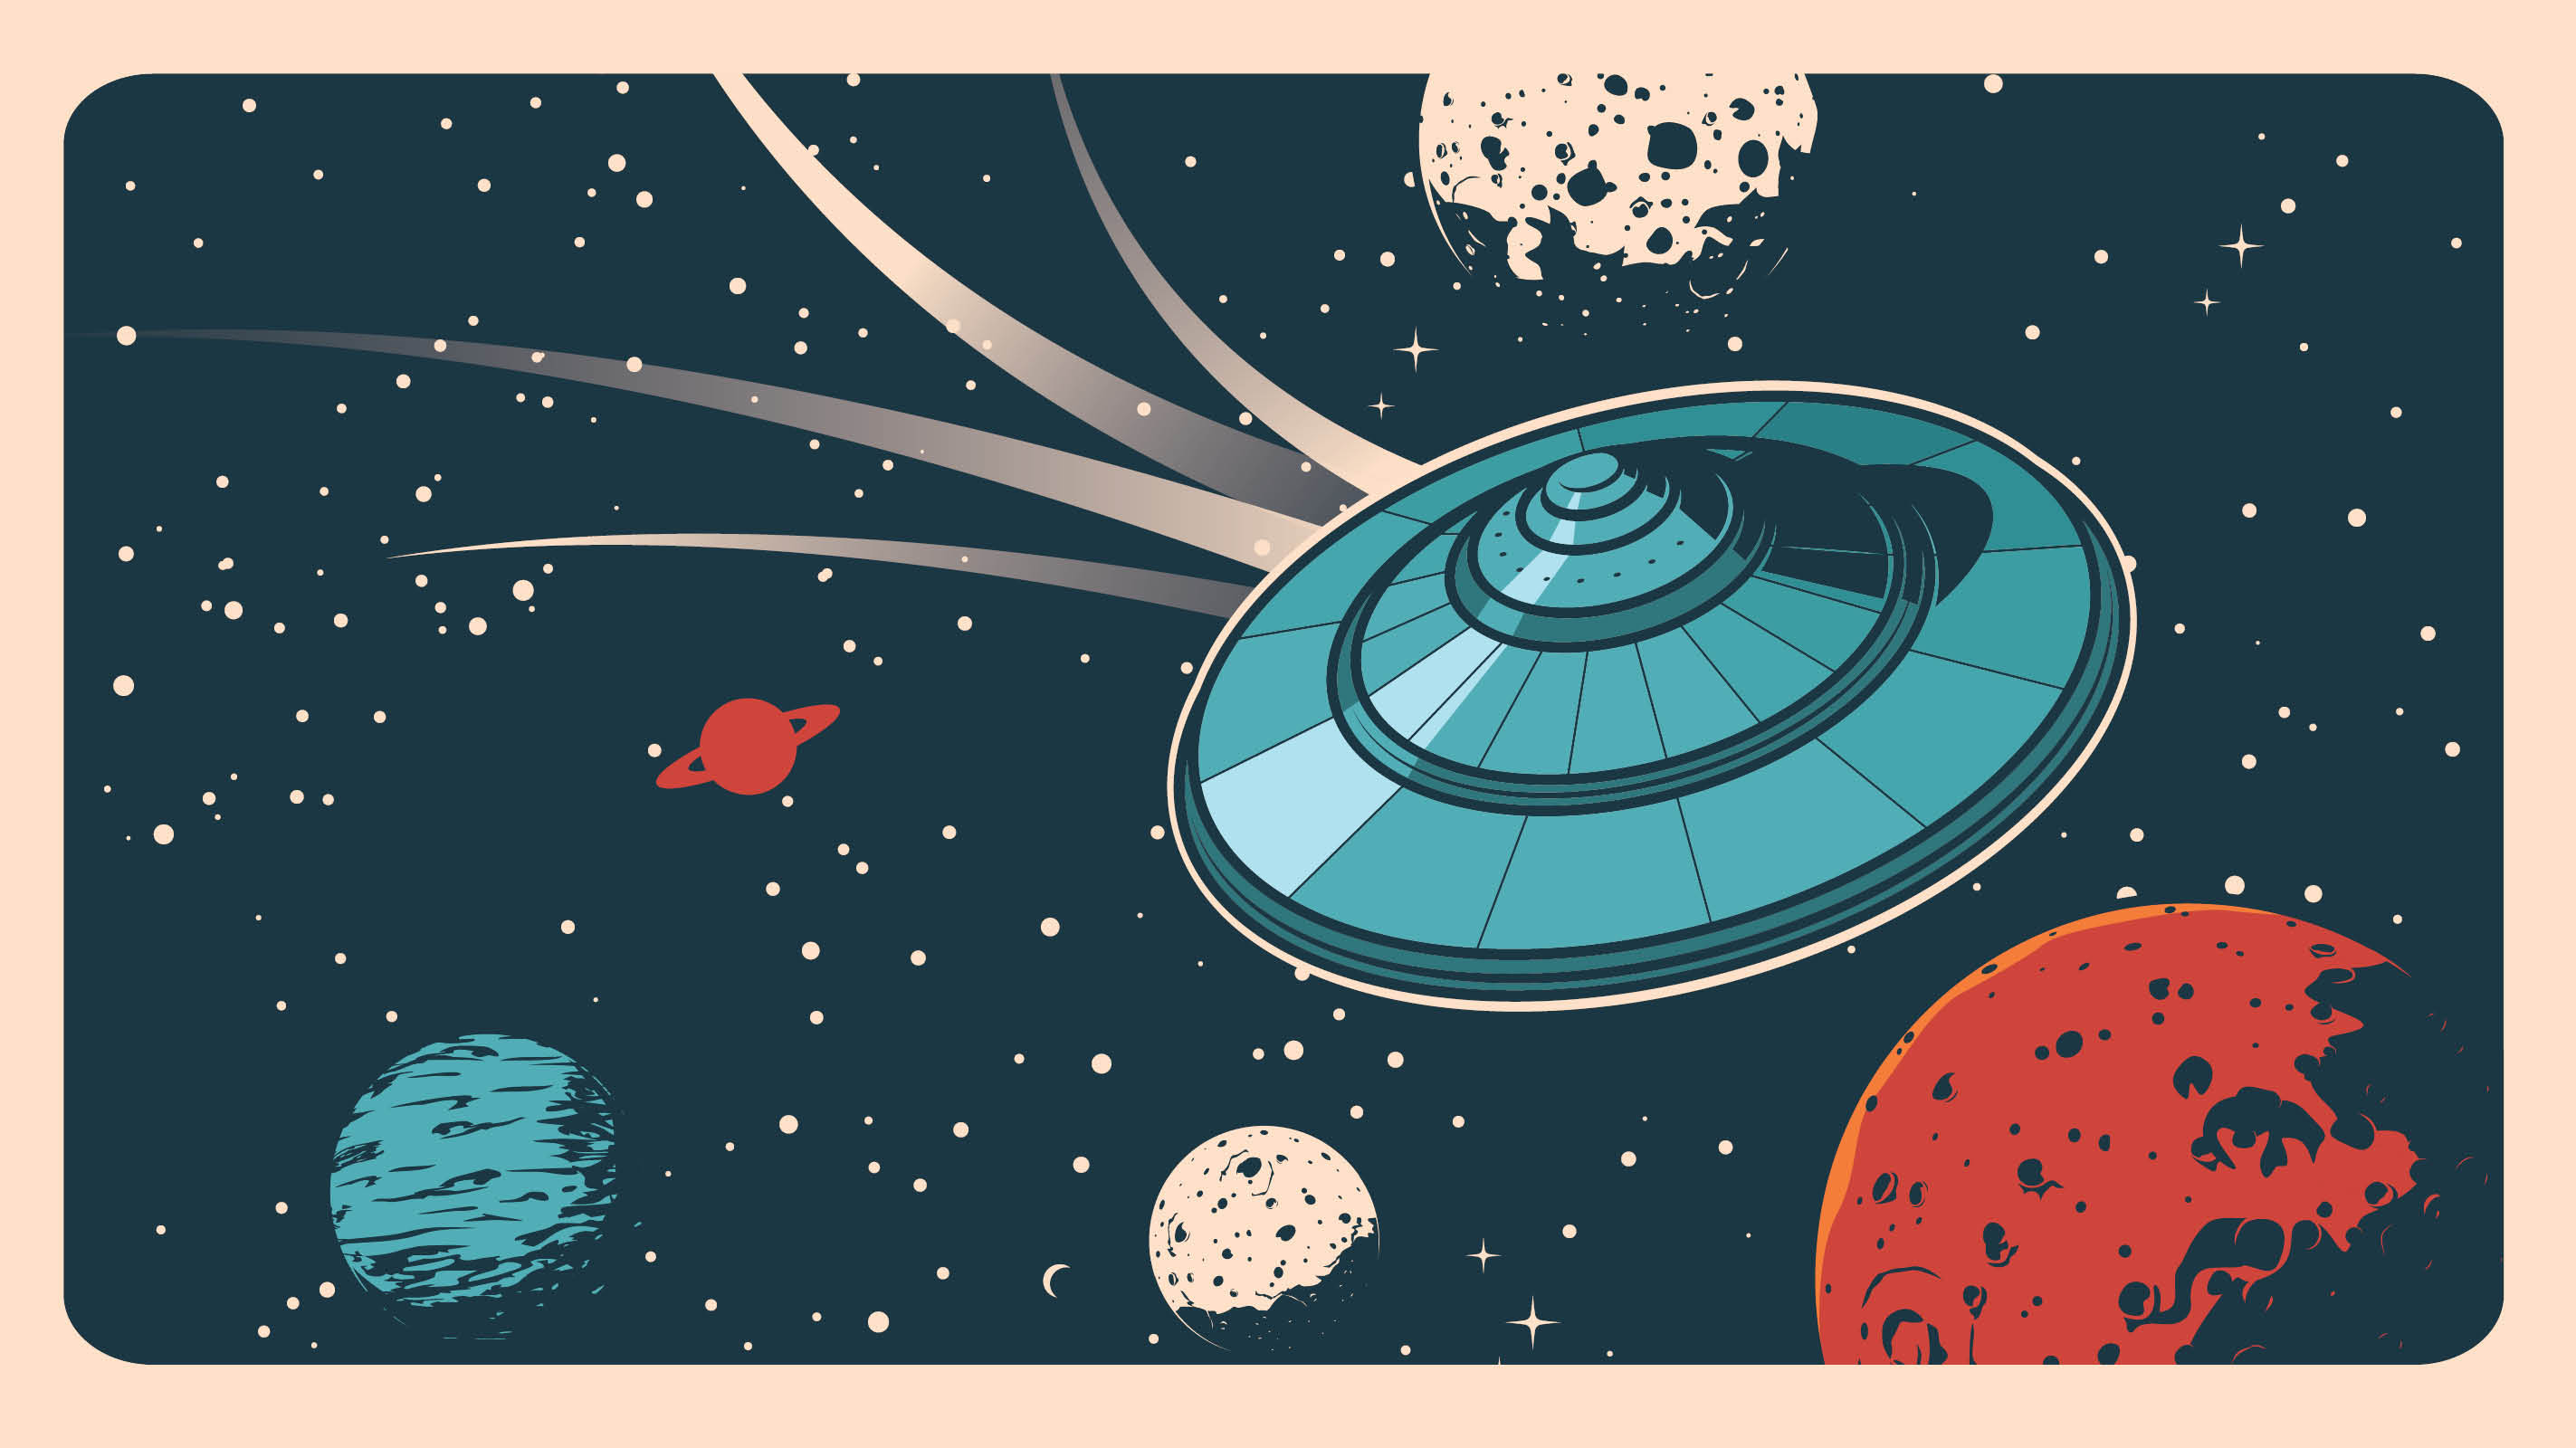 Illustration of an alien spacecraft flying through space, with stars and four planets in the background.